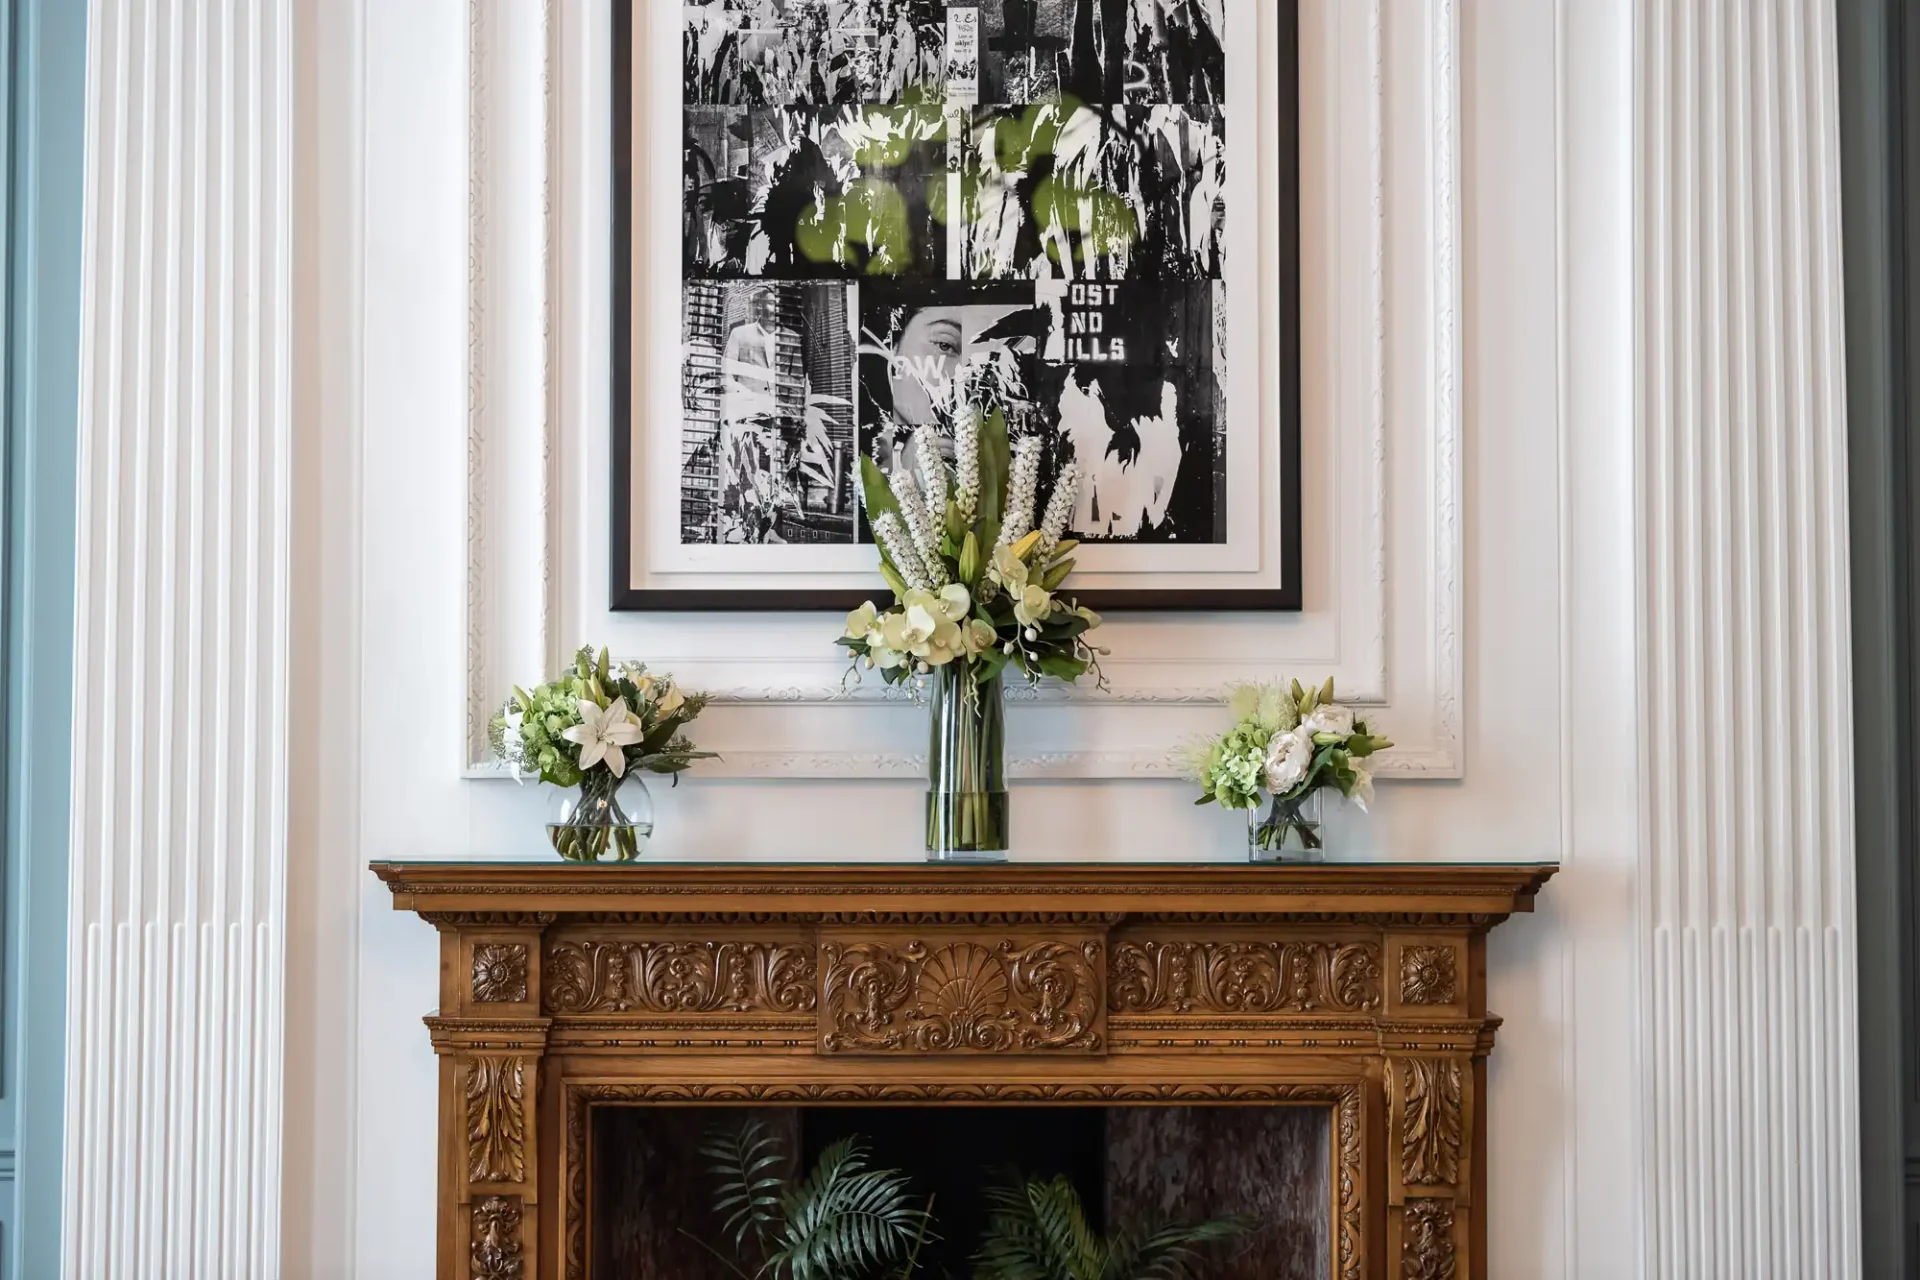 Elegant fireplace mantel with ornate wood carvings, flanked by white pillars and decorated with two floral arrangements and a vase of flowers, beneath a framed black and white poster.